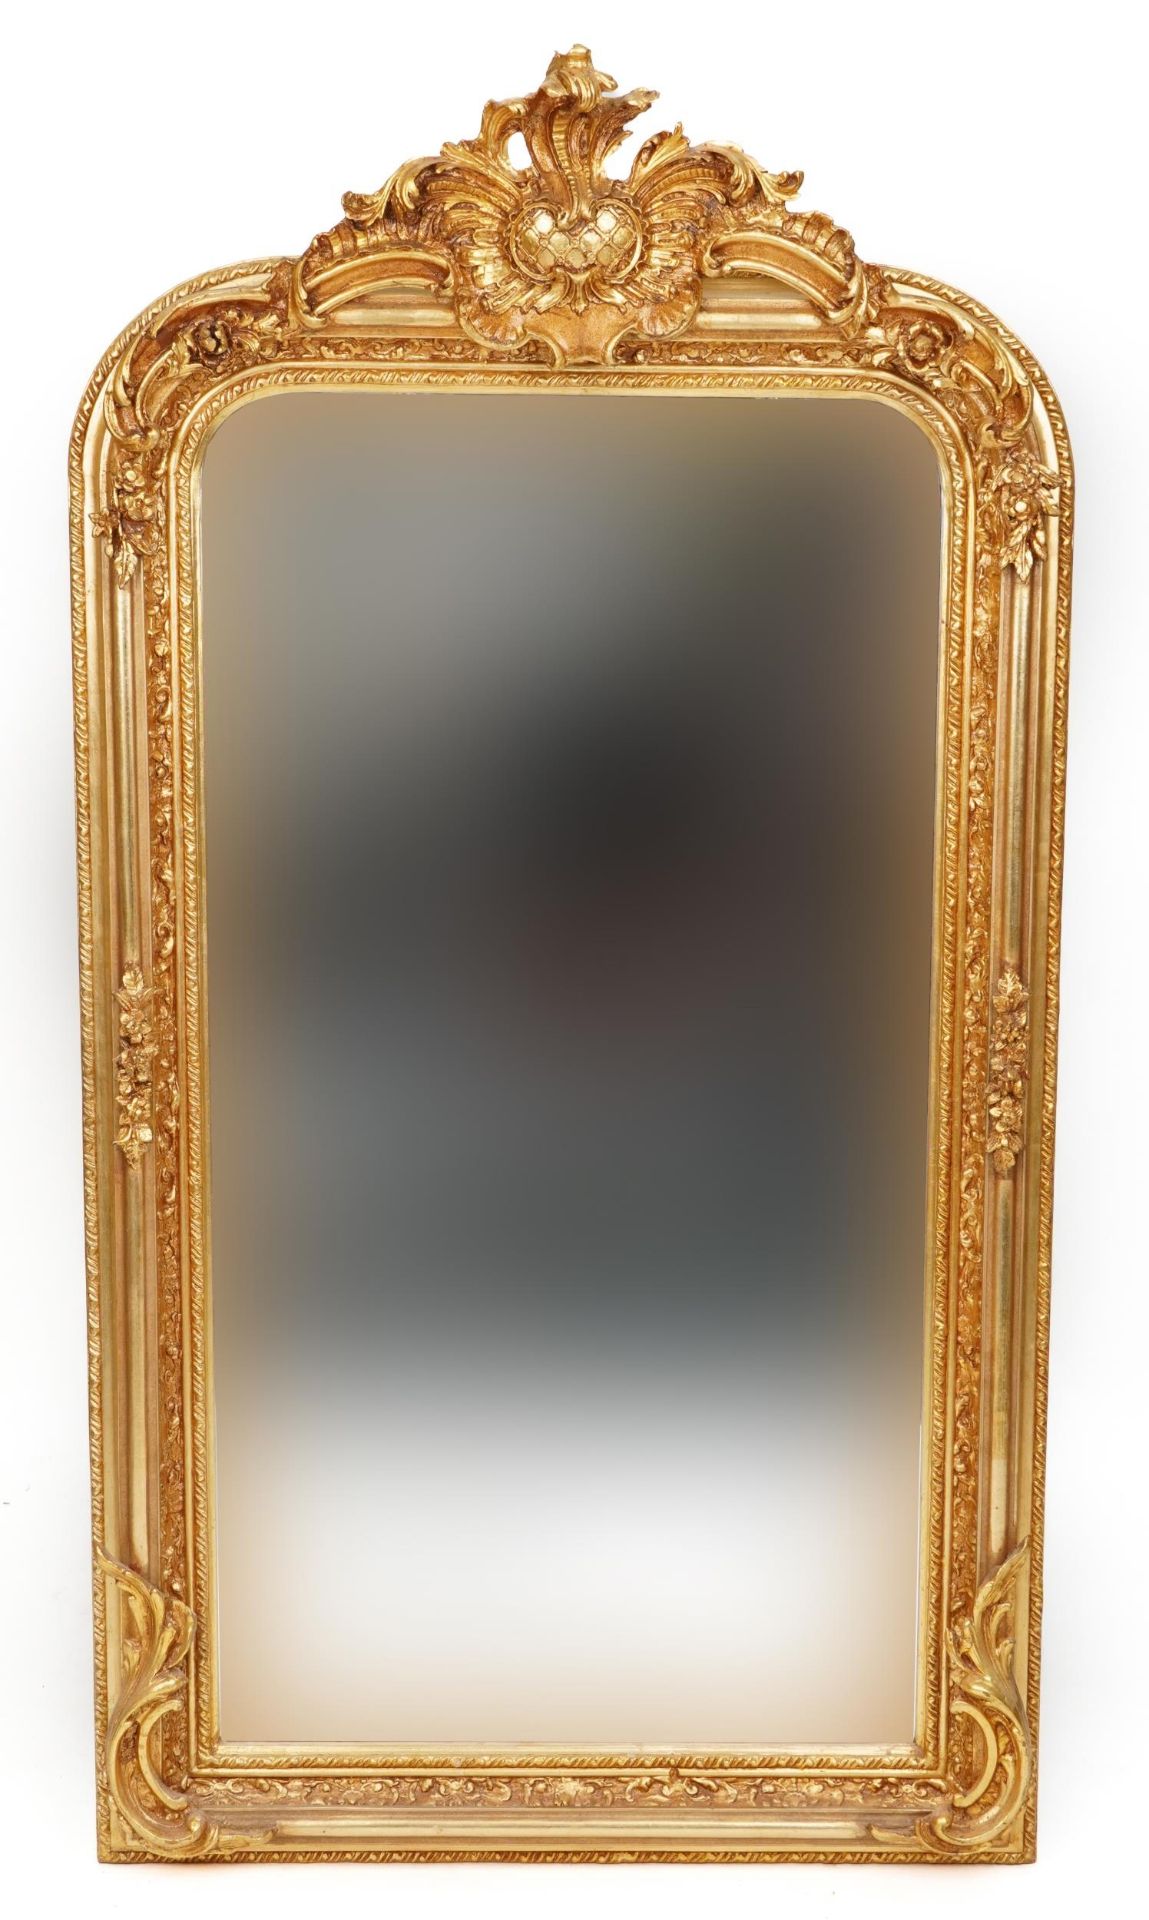 Large ornate gilt framed wall mirror with bevelled glass 158cm high x 84cm wide